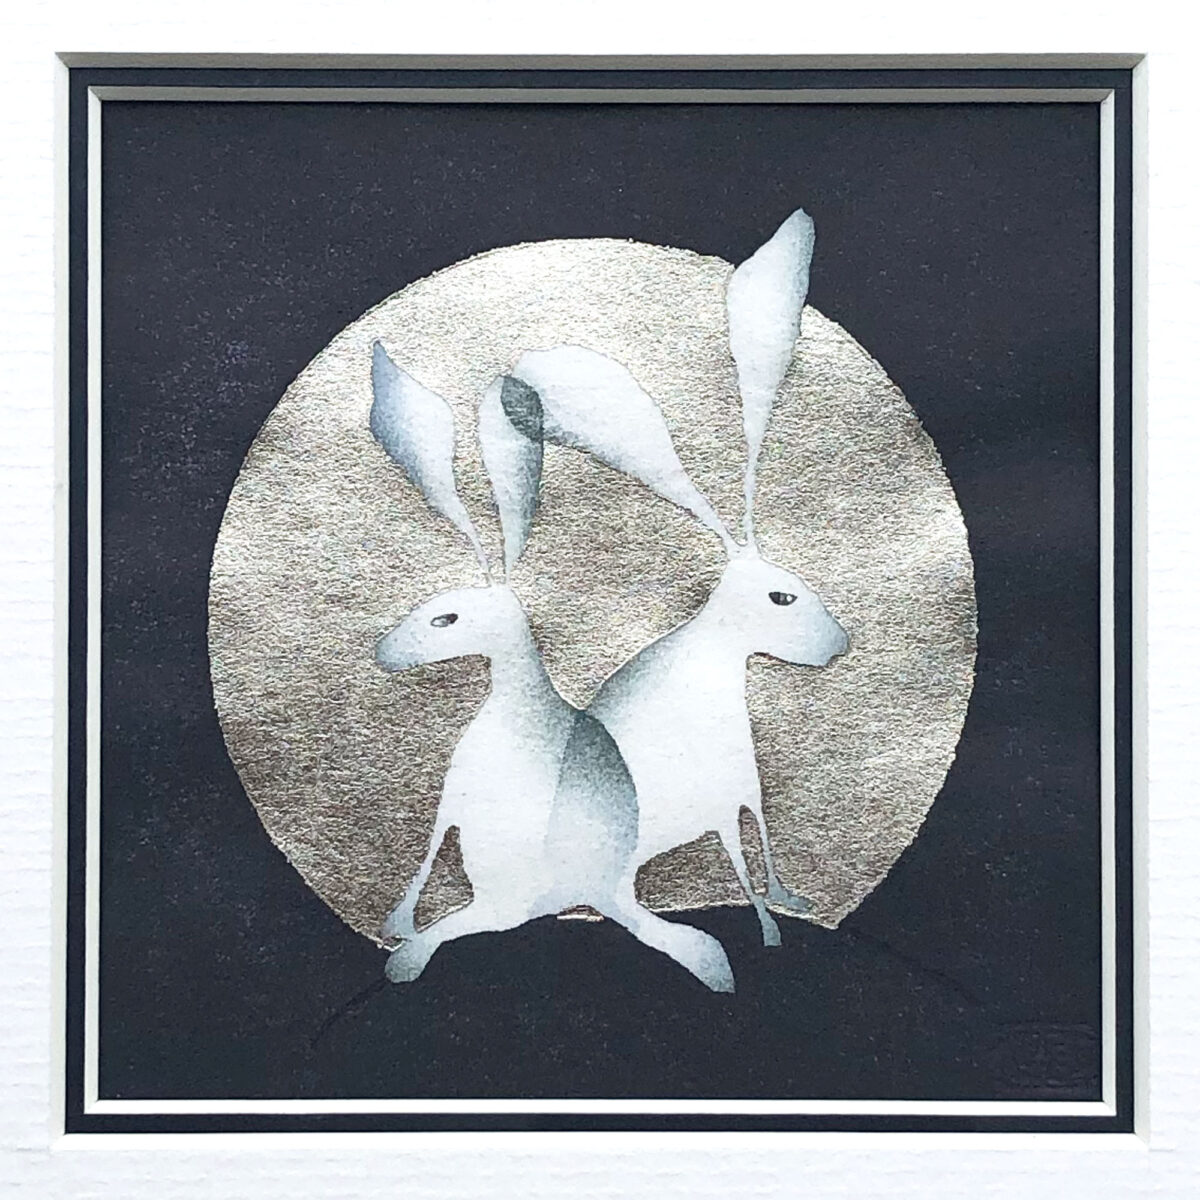 Blue Hares in a Winter Moon woodblock print by Claire Cameron-Smith